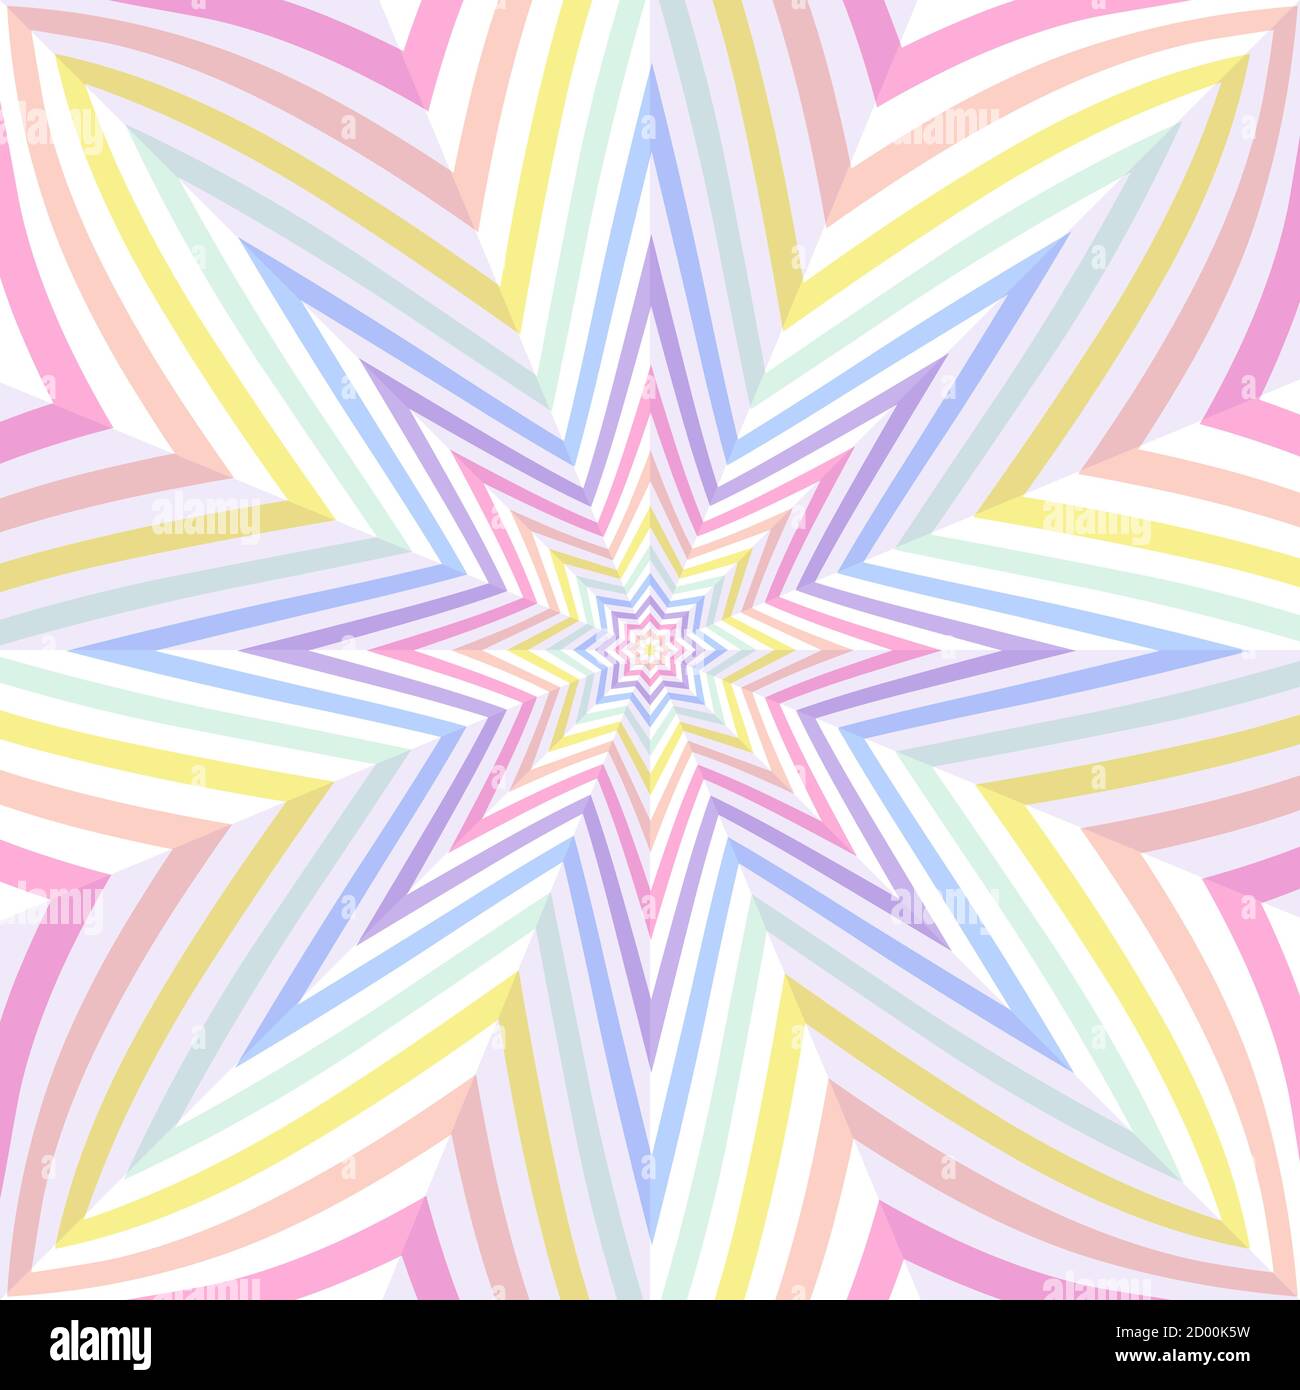 Geometric striped background, pastel rainbow spectrum colors. LGBTQ colors. Abstract geometric striped pattern, rainbow stripes. Vector illustration. Stock Vector